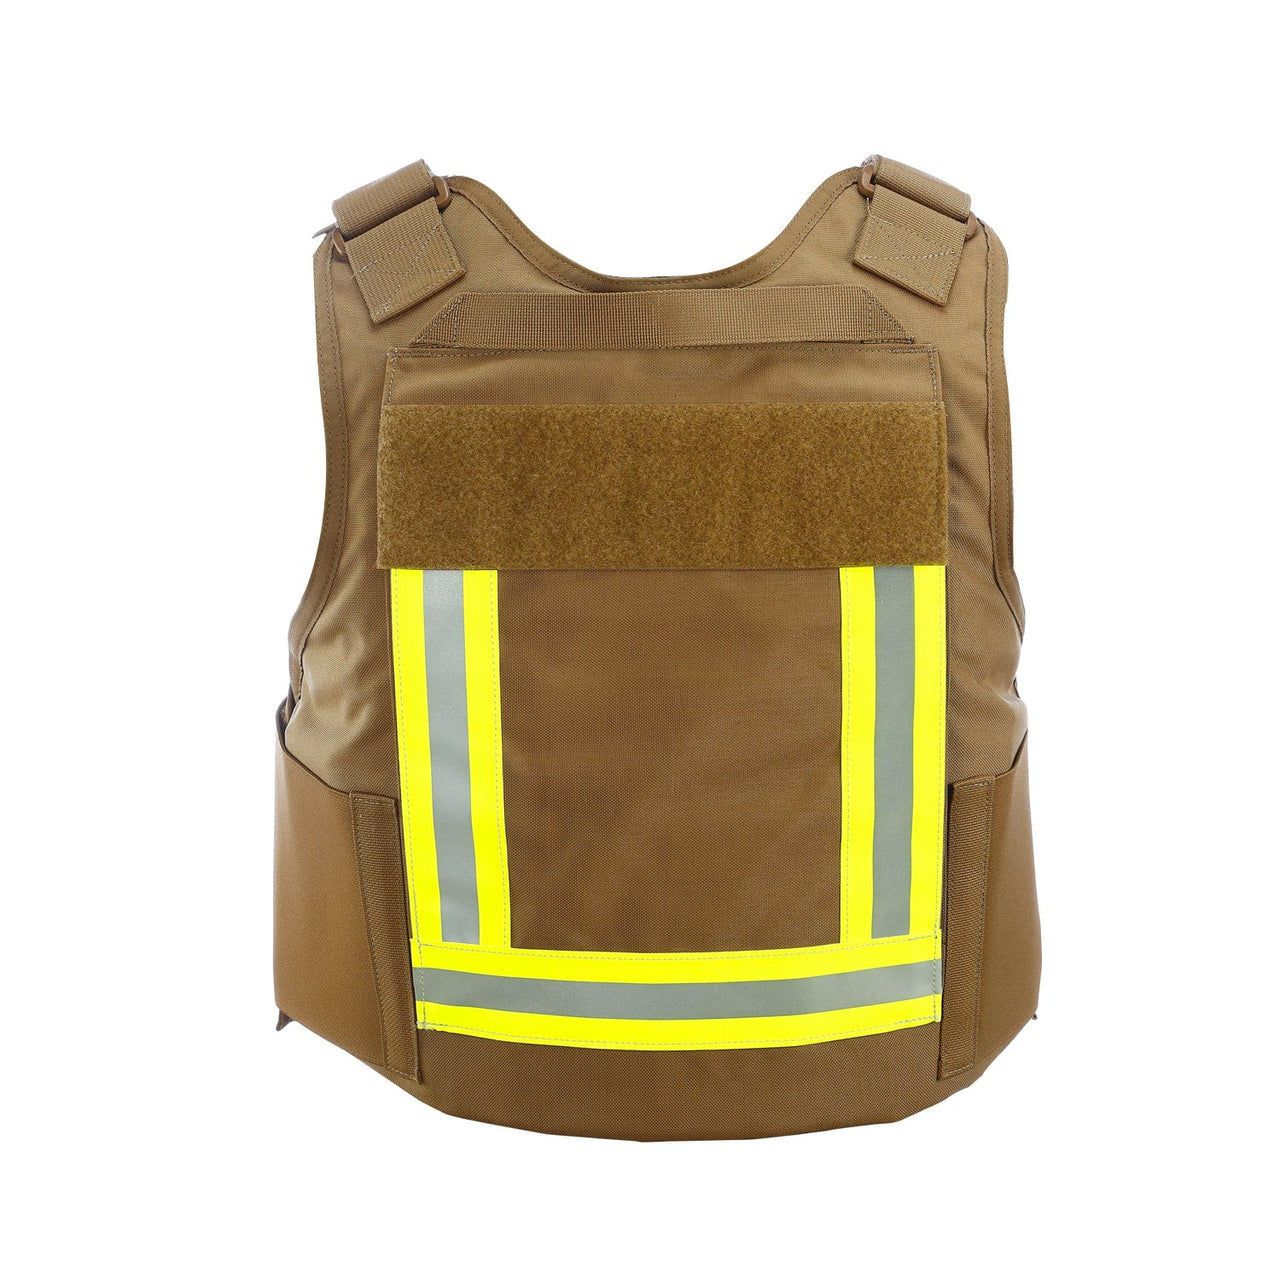 A Body Armor Direct Fireman Tactical Multi-Threat Vest with yellow reflective strips.